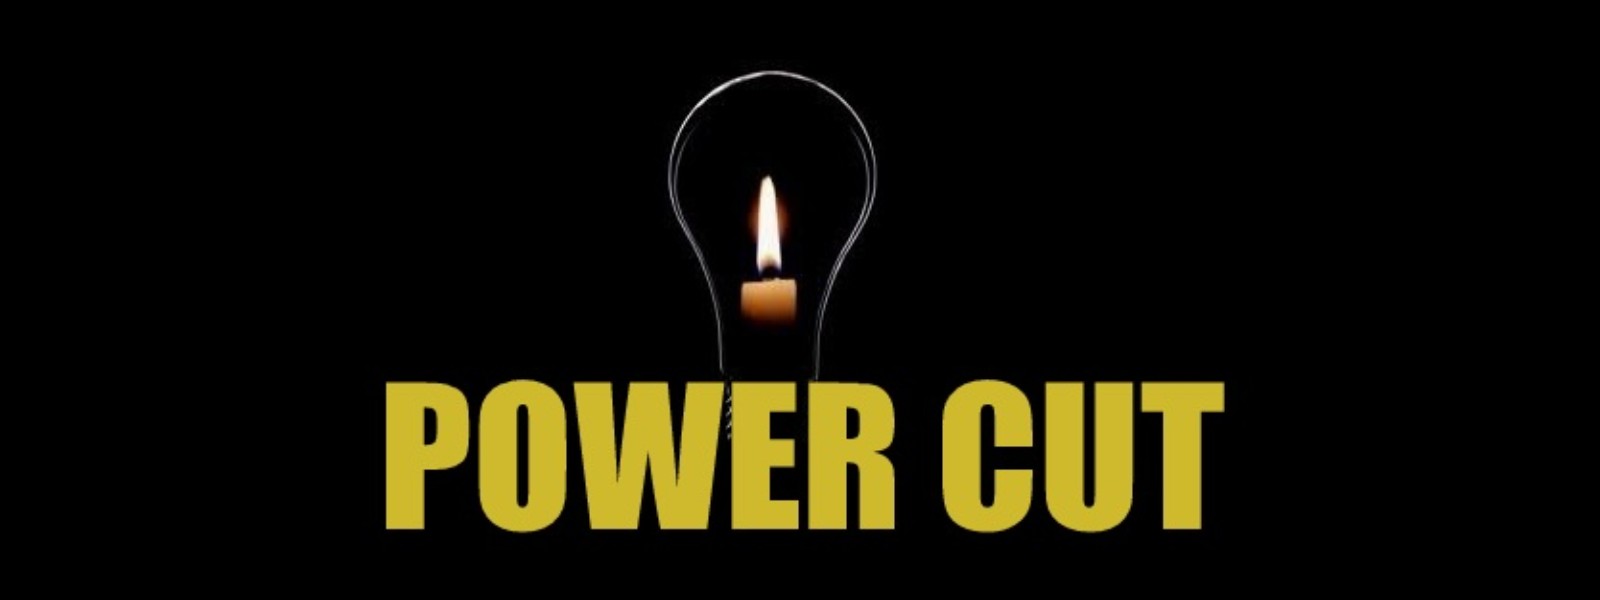 Power cuts will be experienced on Friday (7) – CEB